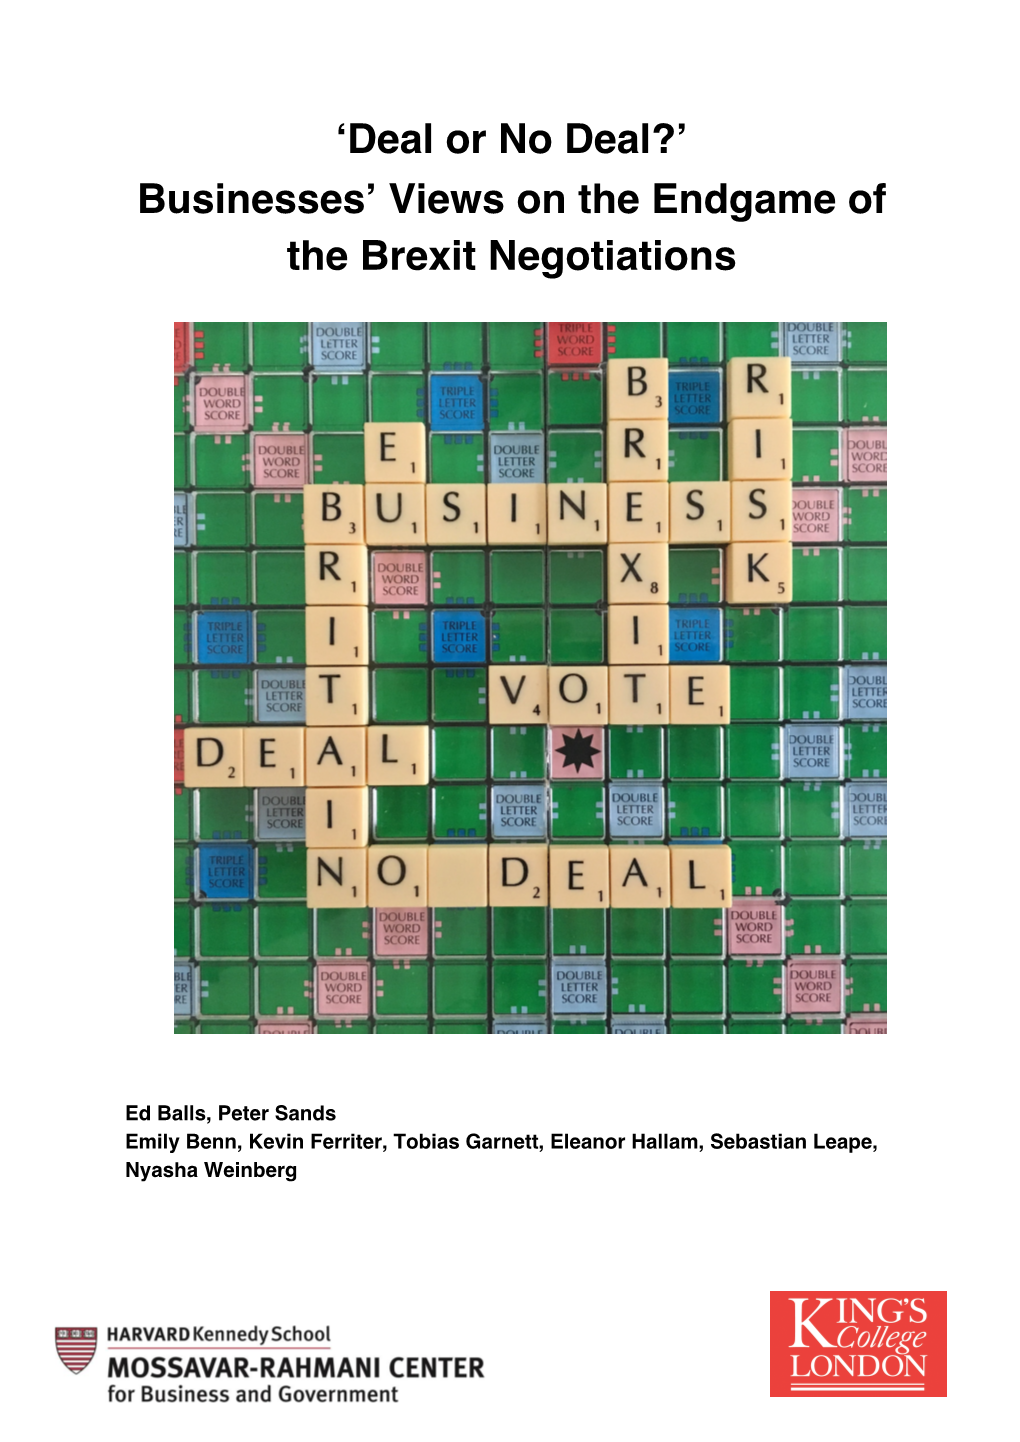 Businesses' Views on the Endgame of the Brexit Negotiations